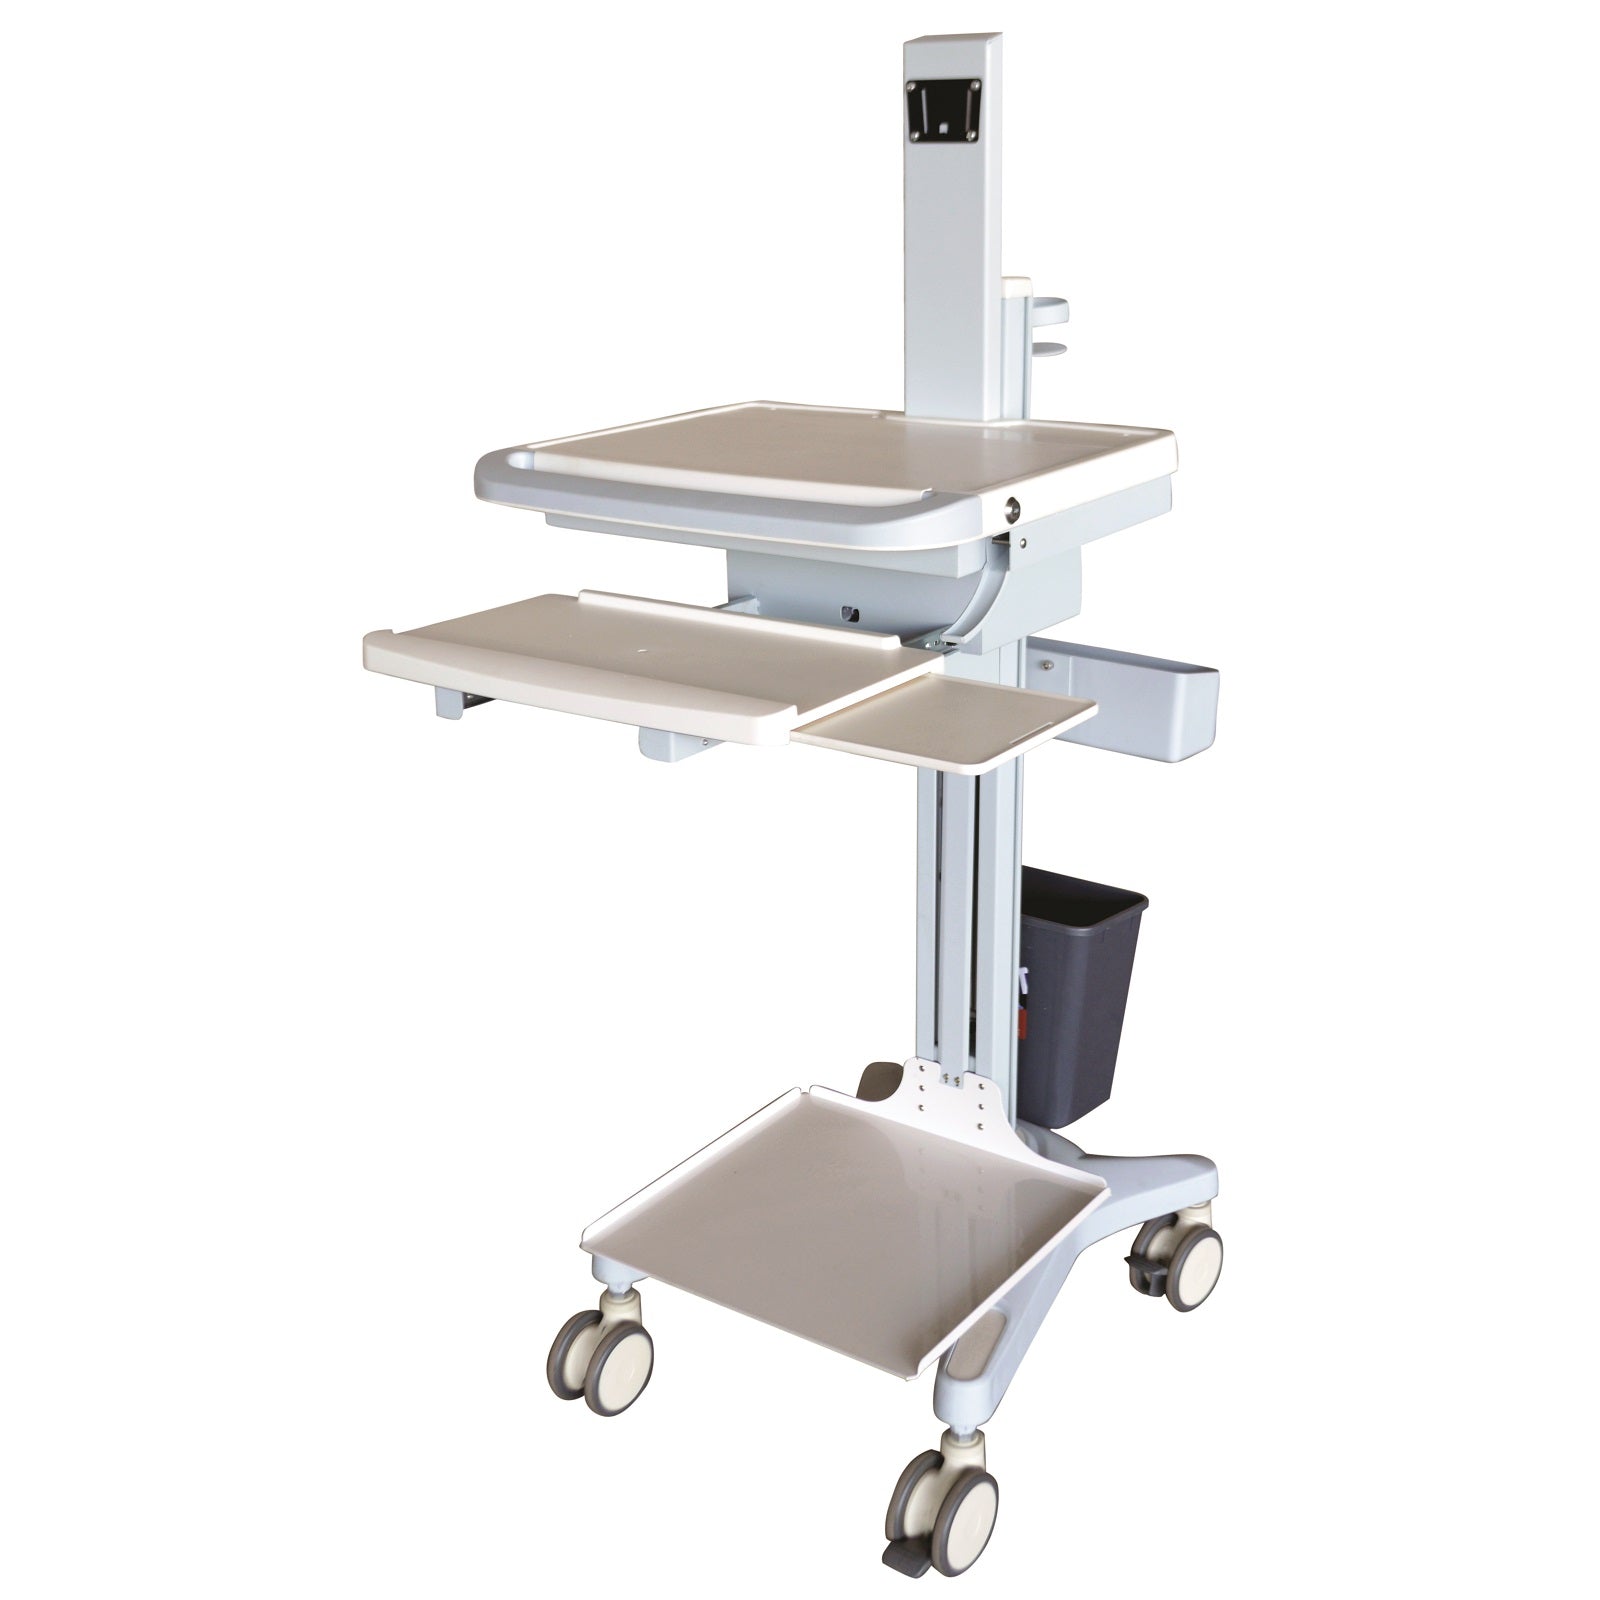 A great addition to any healthcare facility or hospital. Our versatile workstation trolley is packed full of features and comes with all accessories included.